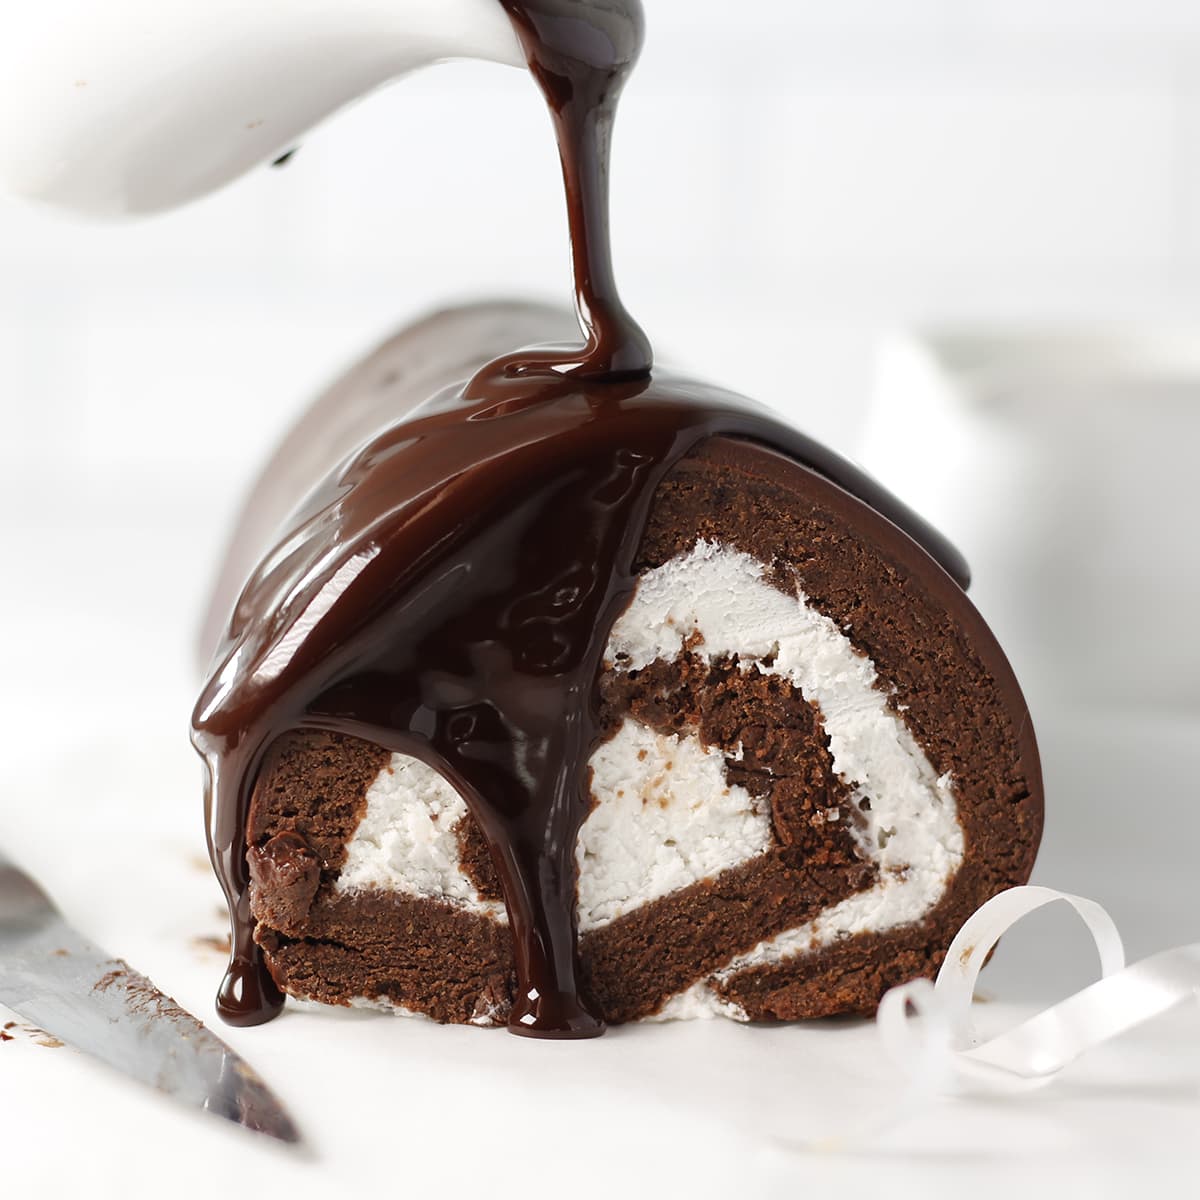 Rolle cake with whipped cream inside and a ganache being poured.